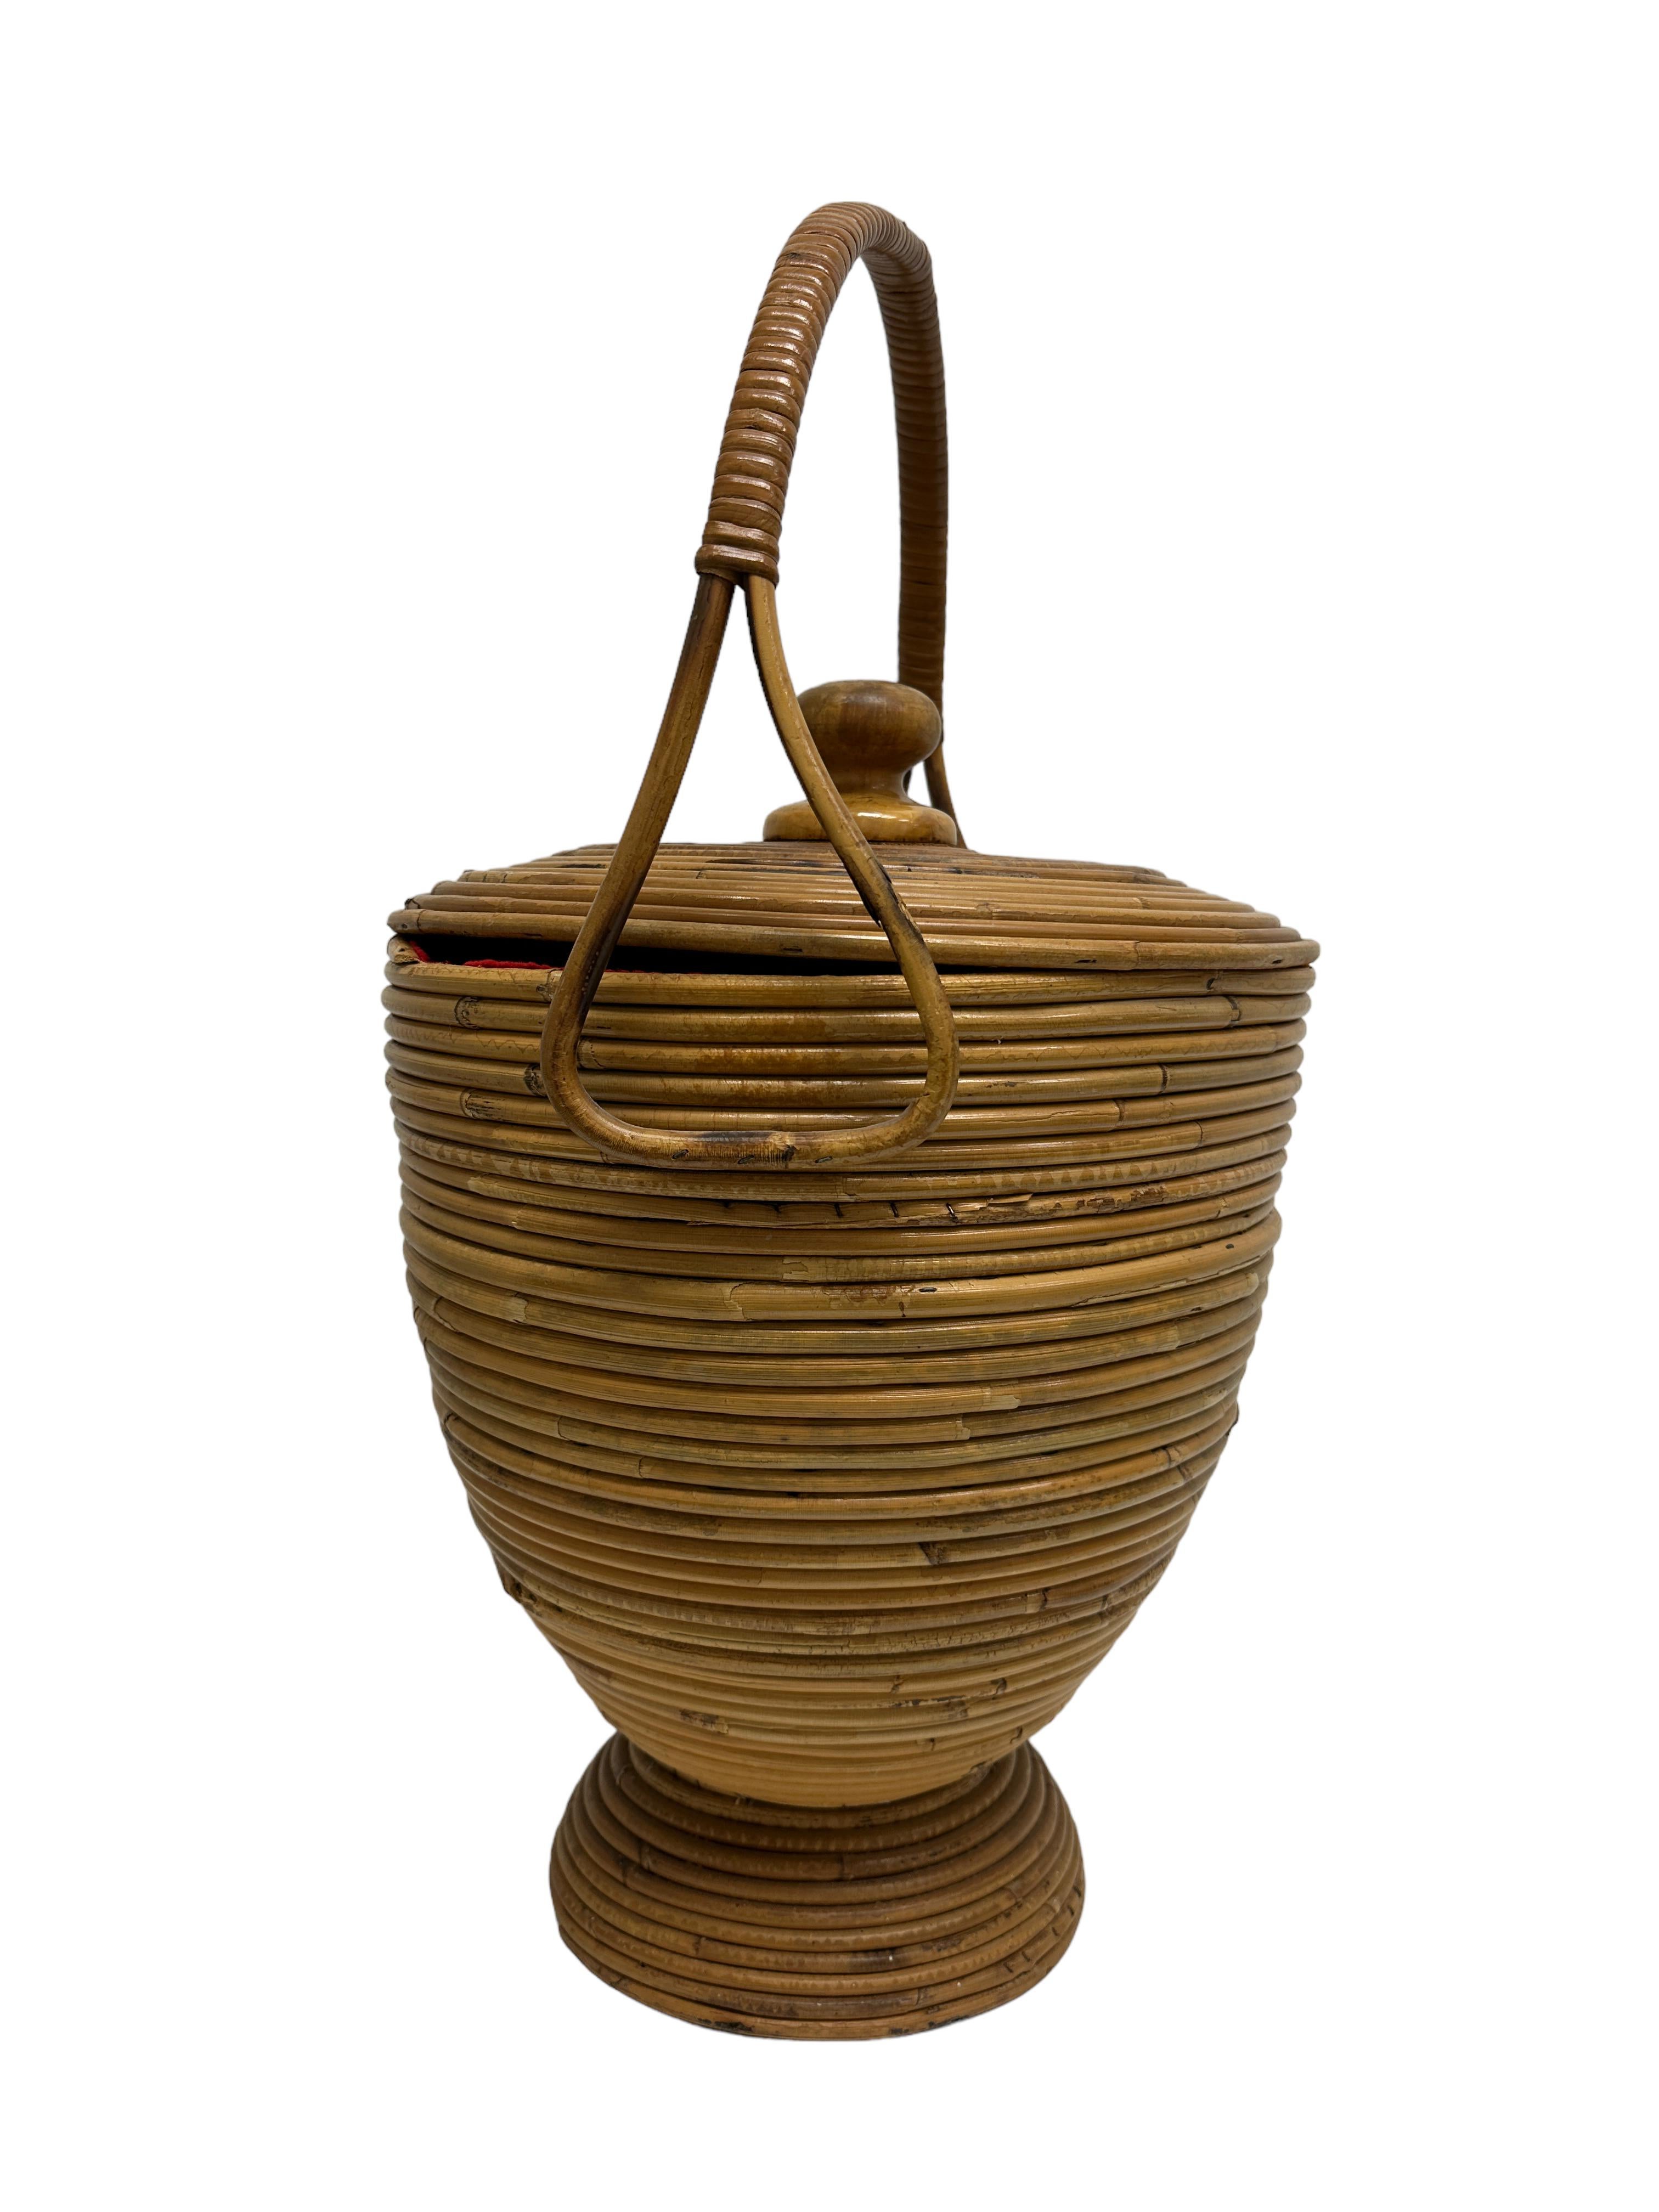 Offered is an absolutely stunning, 1970s Italian decorative basket or catchall. Original midcentury era. Minor patina gives this piece a classy statement. Attributed to Vivai Del Sud, fount at an Estate sale in Verona, Italy.